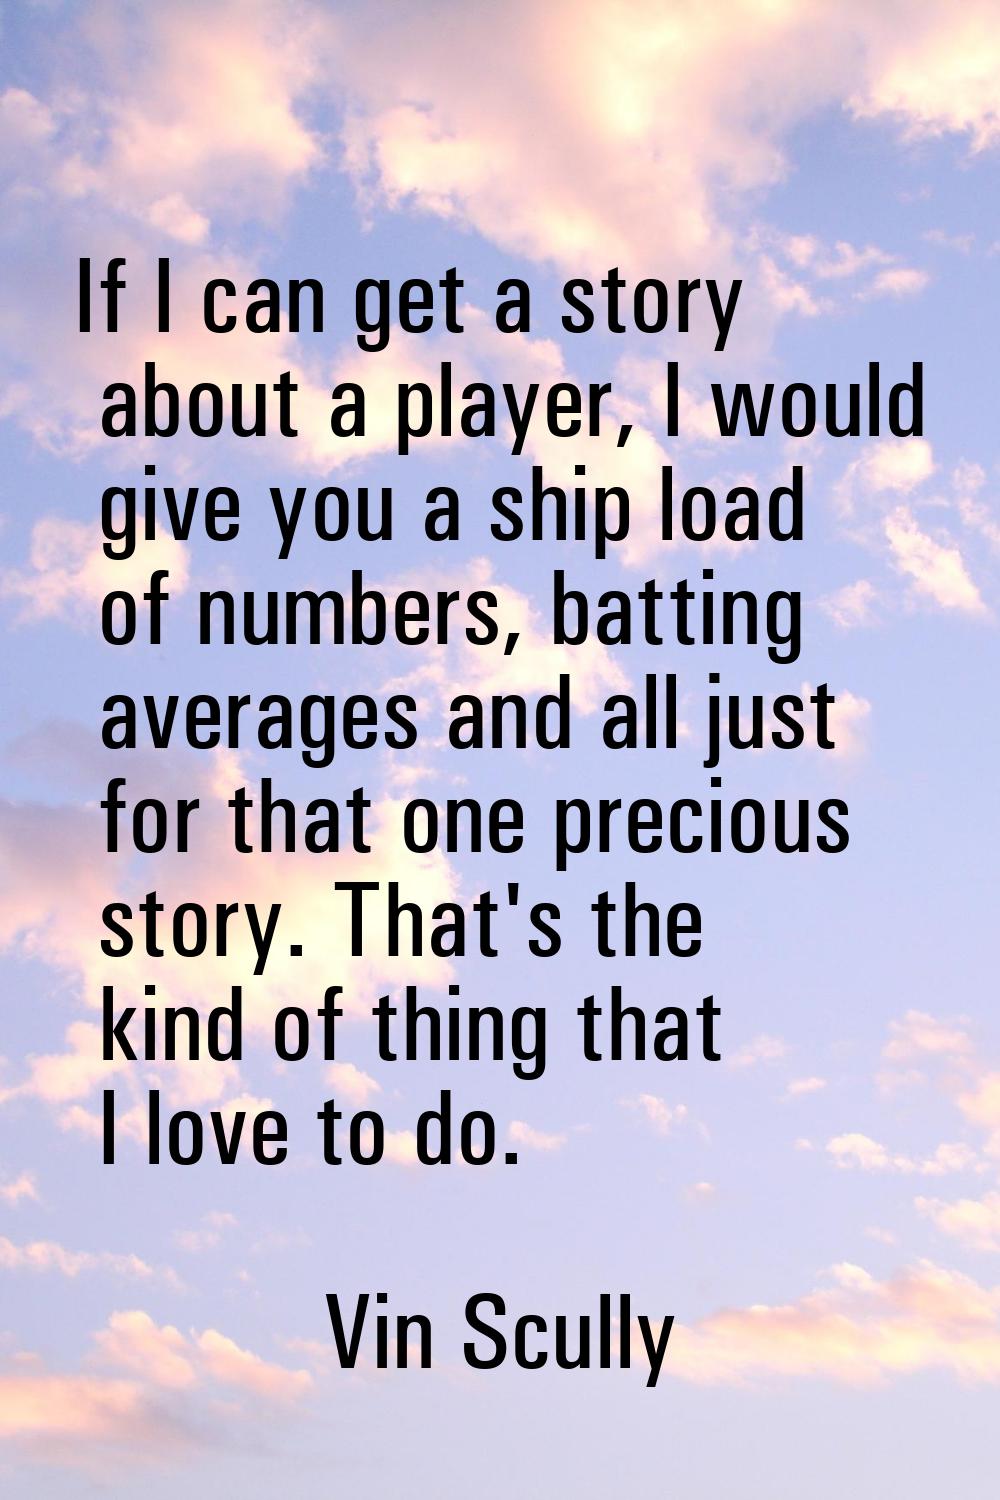 If I can get a story about a player, I would give you a ship load of numbers, batting averages and 